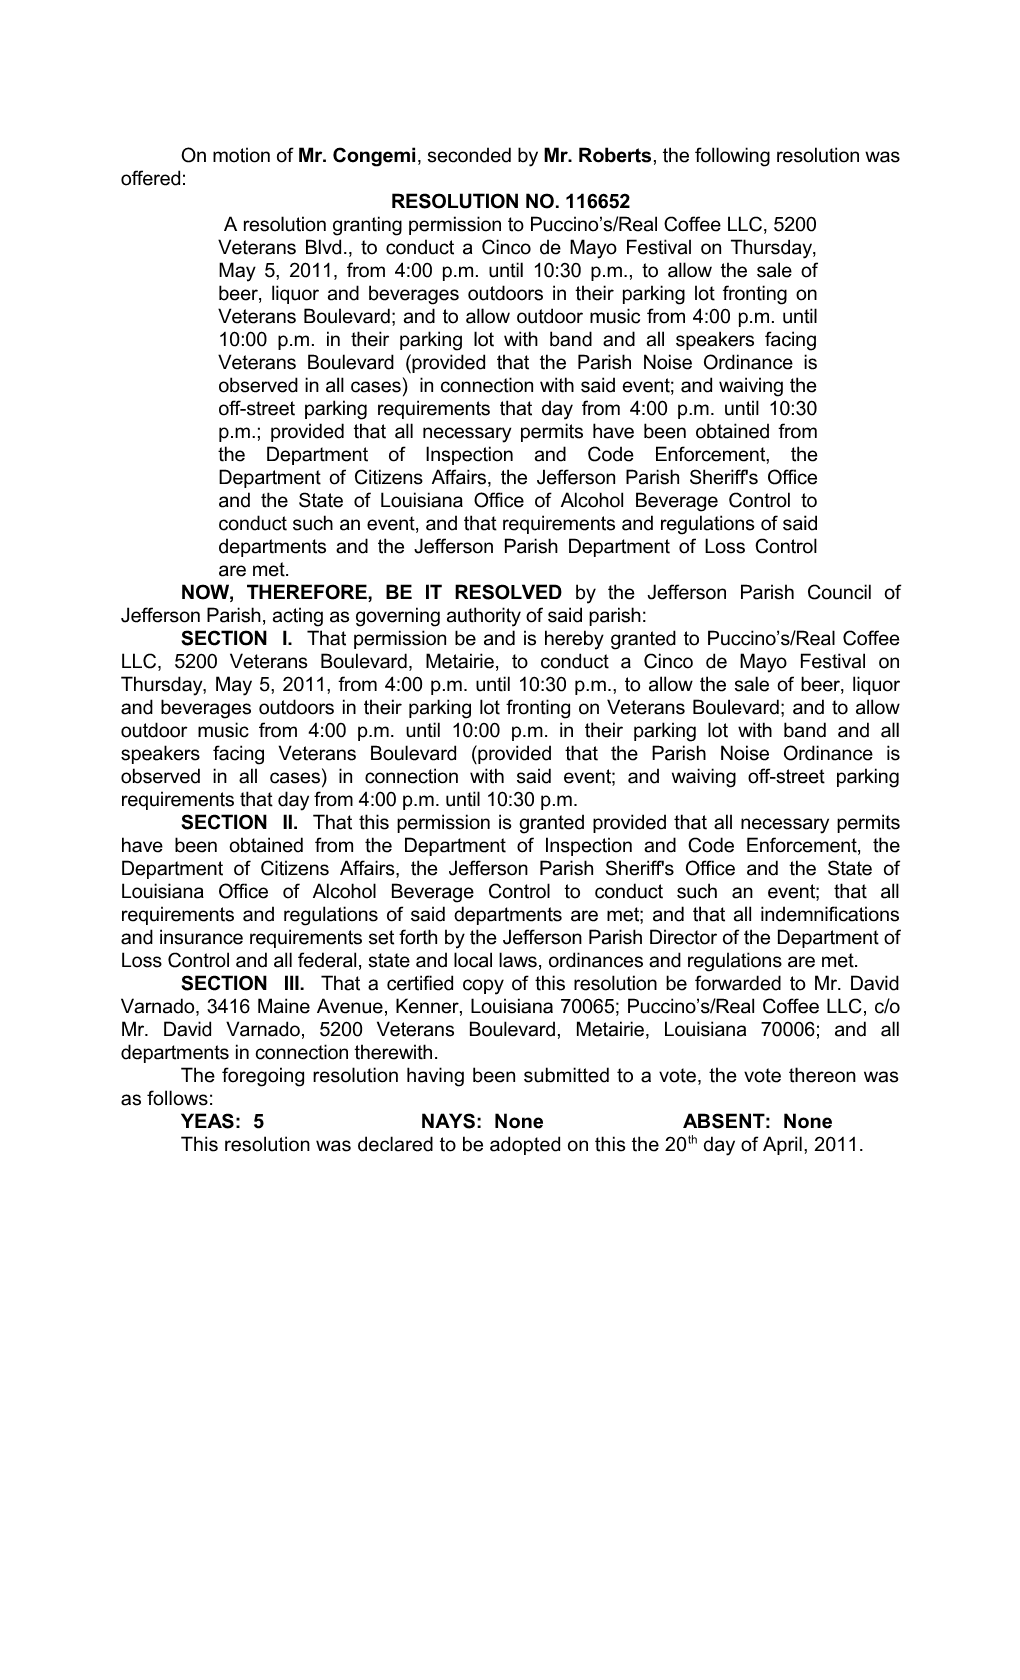 On Motion of Mr. Congemi, Seconded by Mr. Roberts , the Following Resolution Was Offered